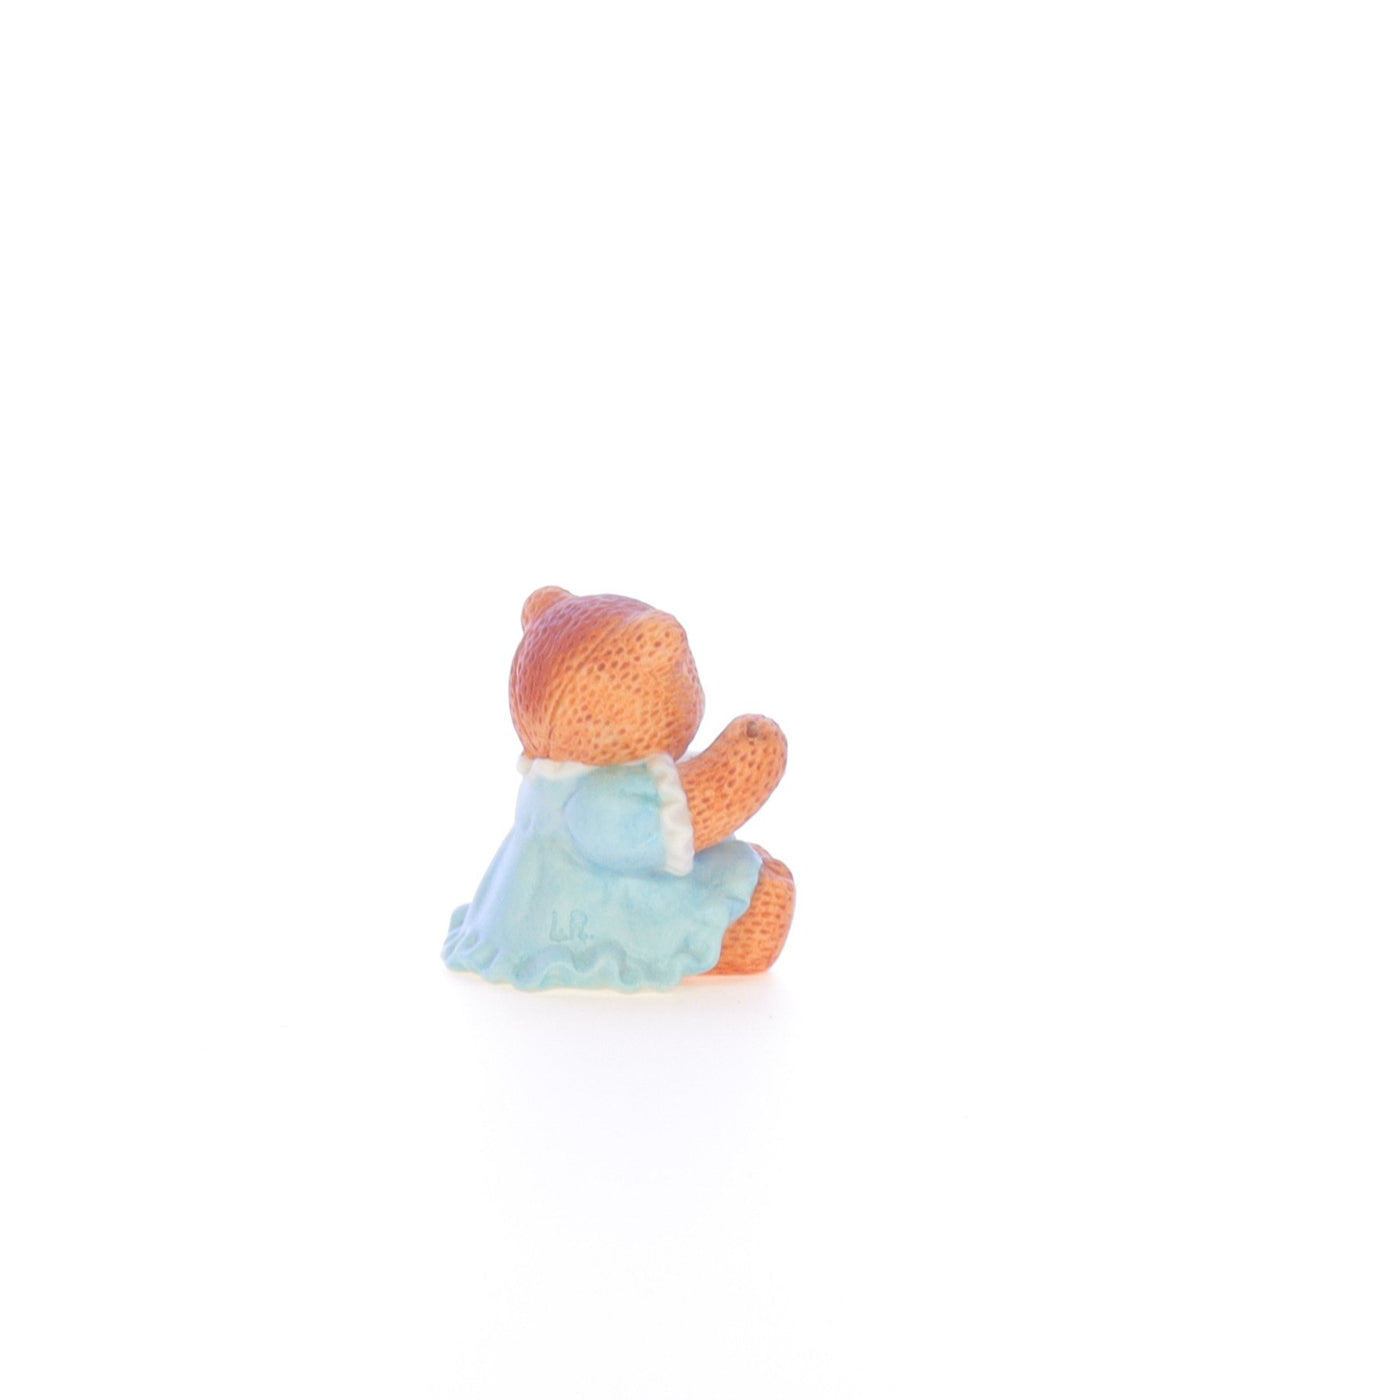 Lucy_And_Me_by_Lucy_Atwell_Porcelain_Figurine_Bear_Writing_Valentine_Lucy_Unknown_020_06